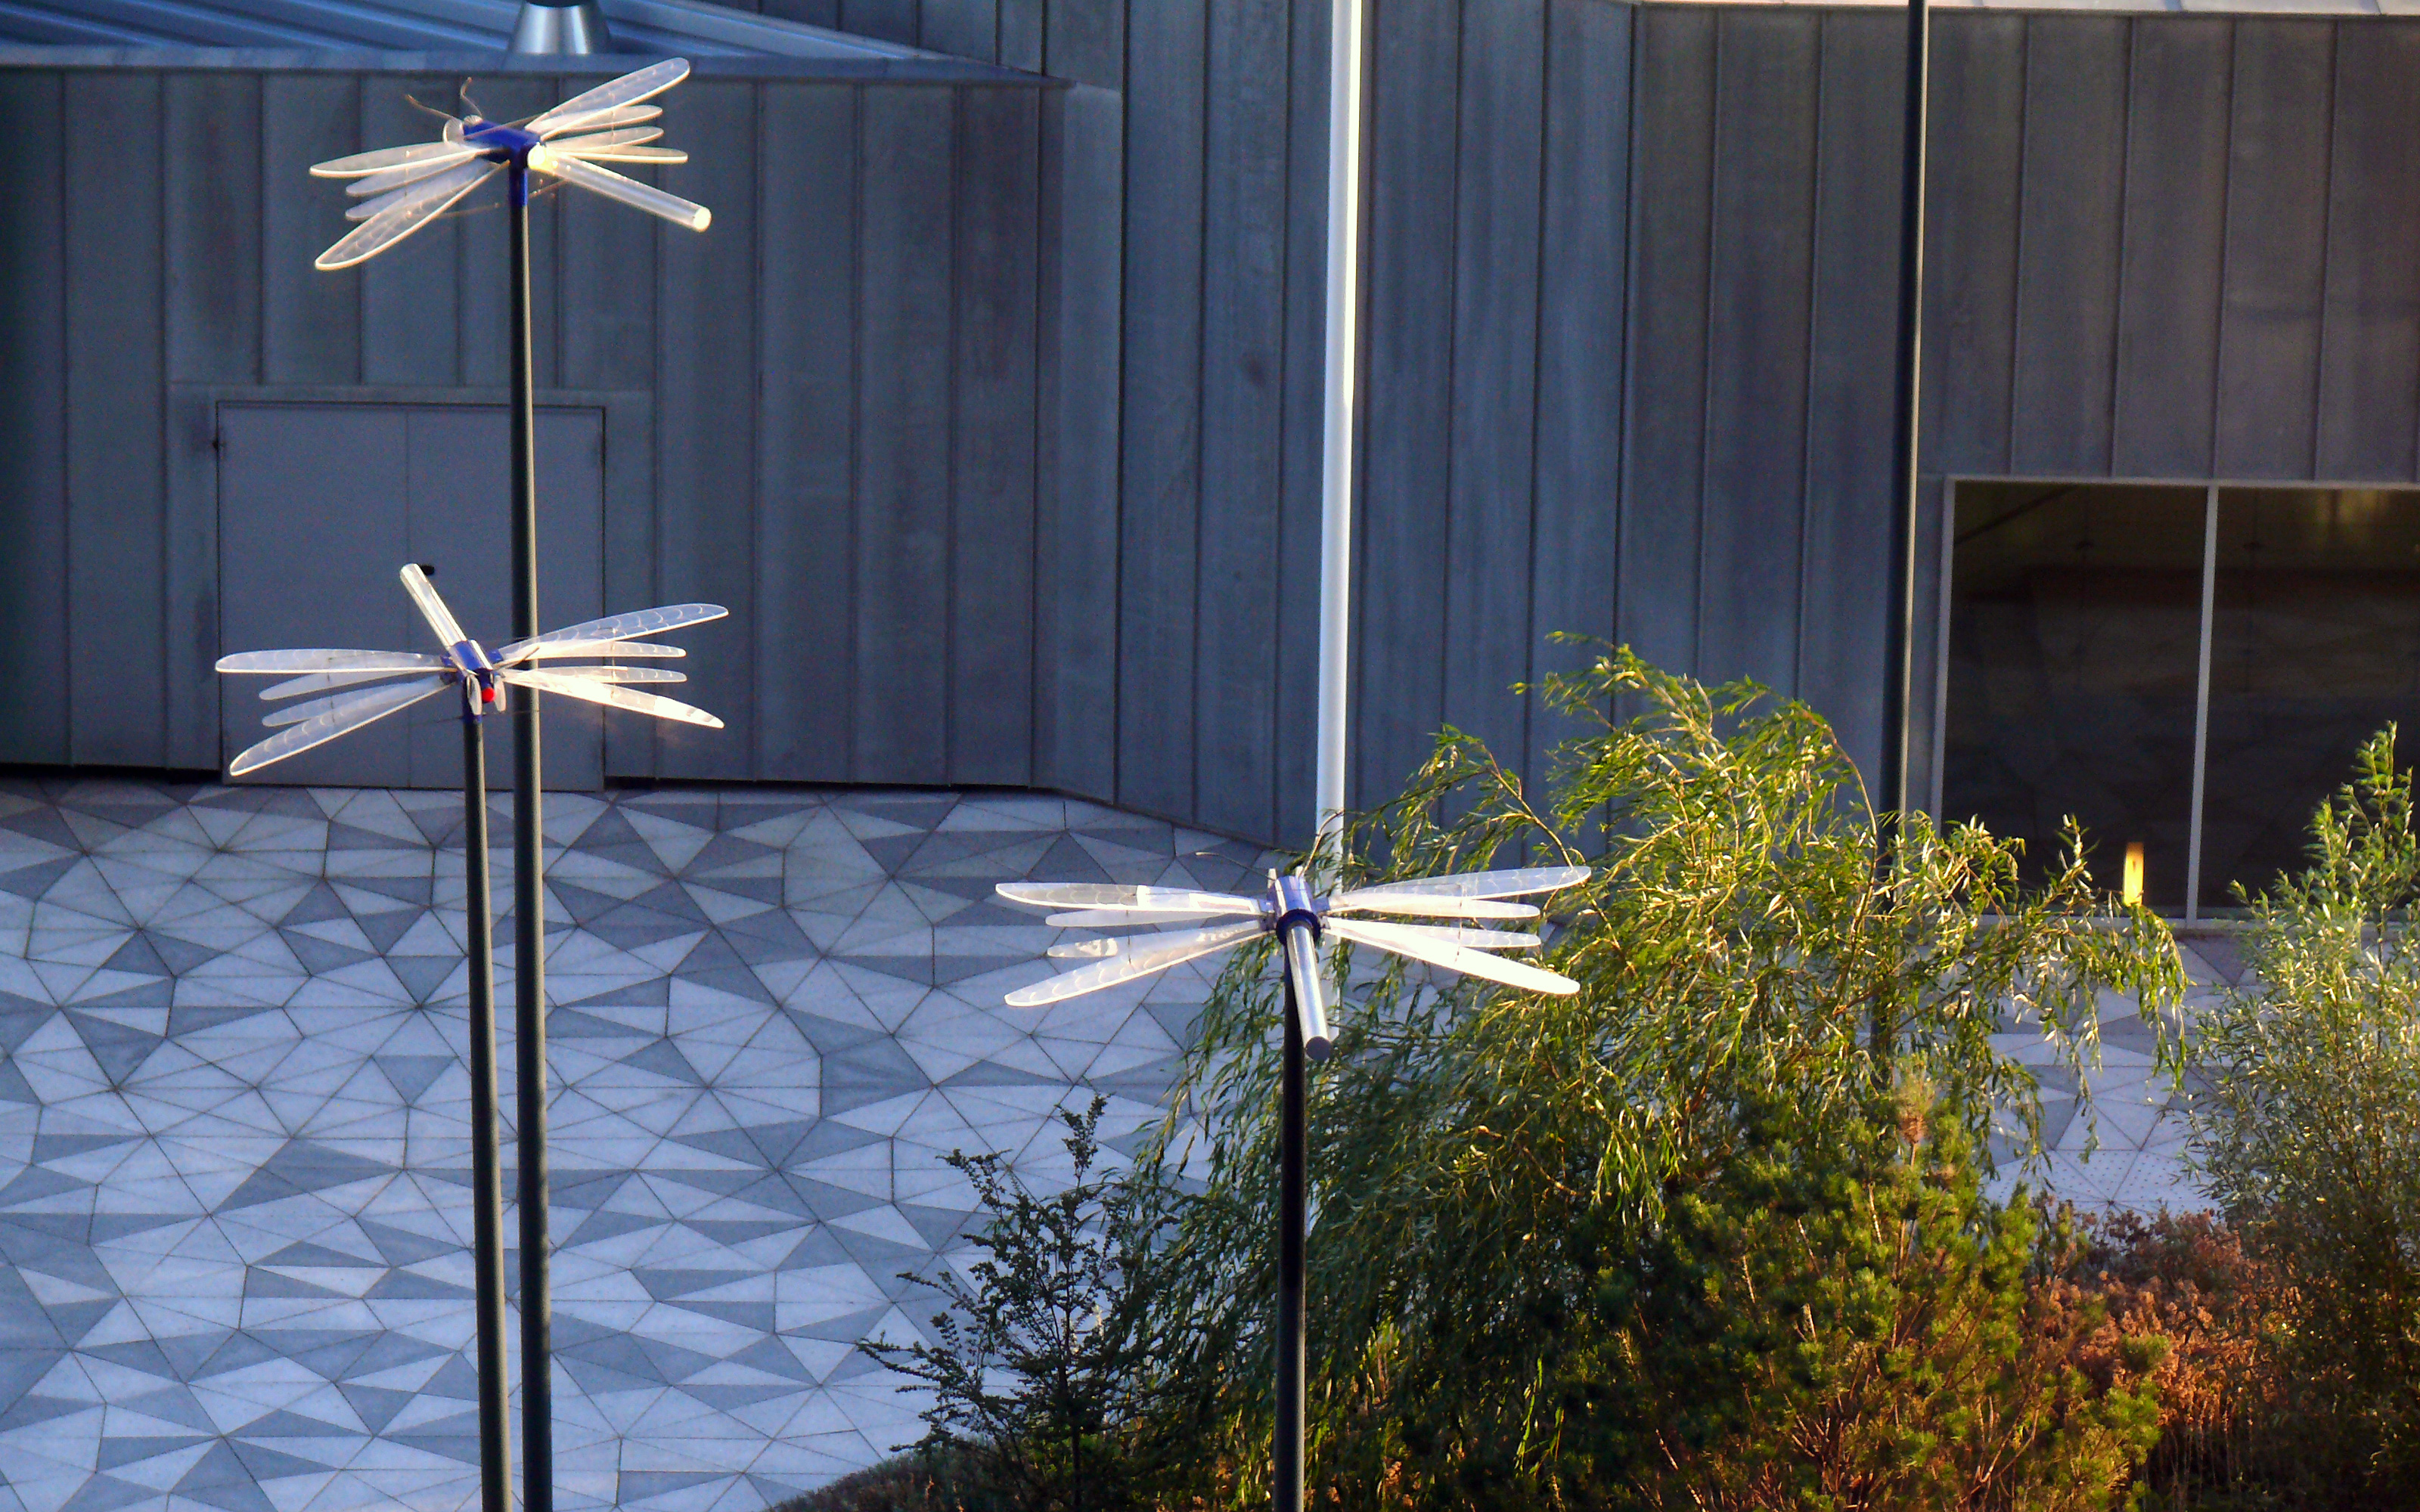 Walkways in harlequin pattern and dragonfly-like spotlights